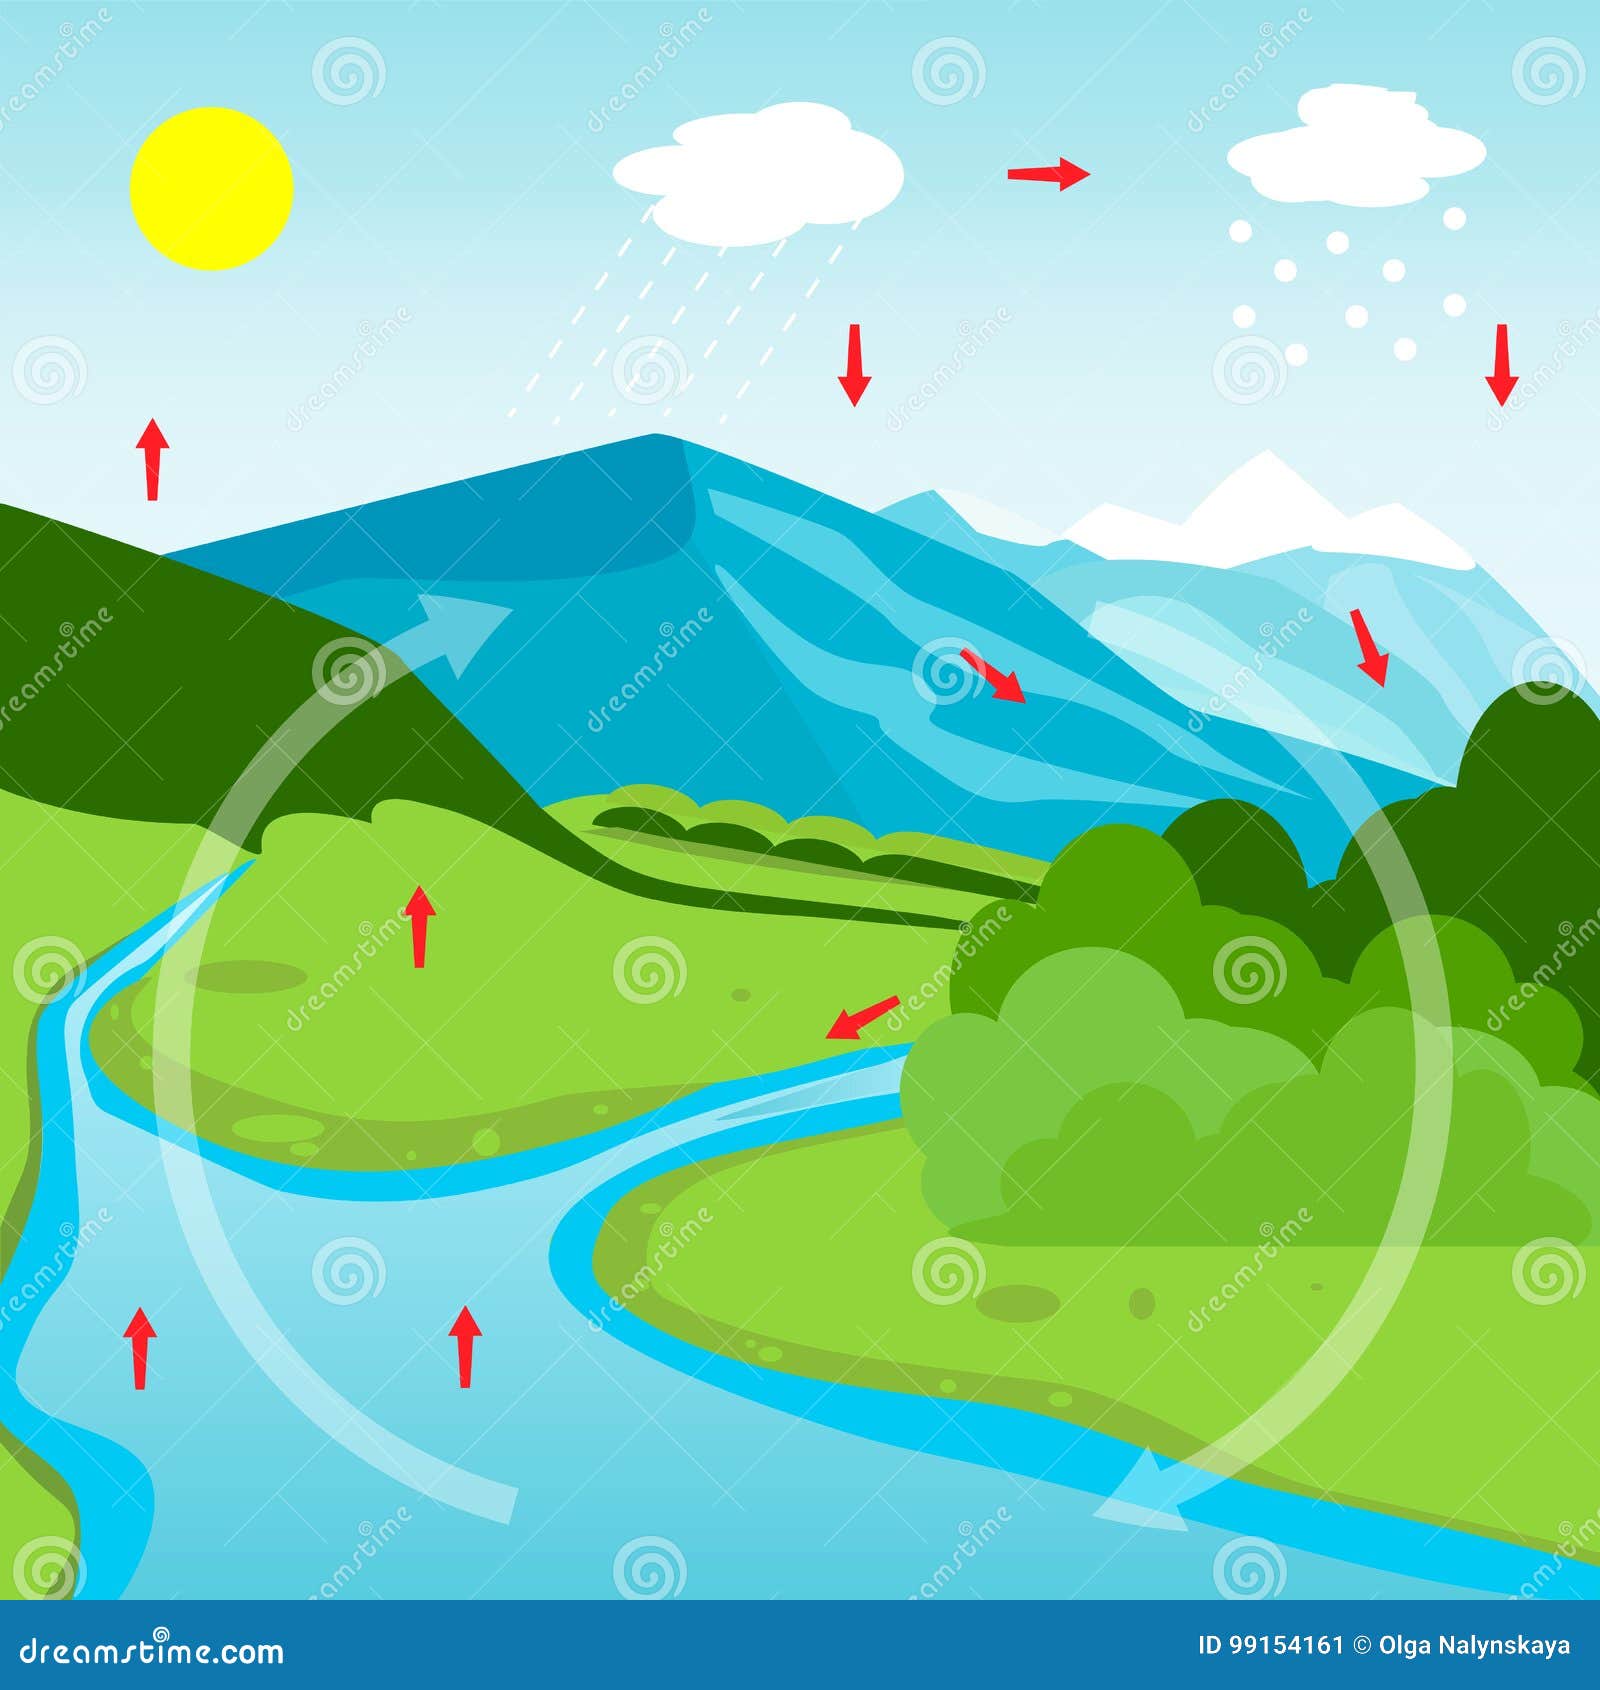 Water Cycle Diagram stock vector. Illustration of clipart ...